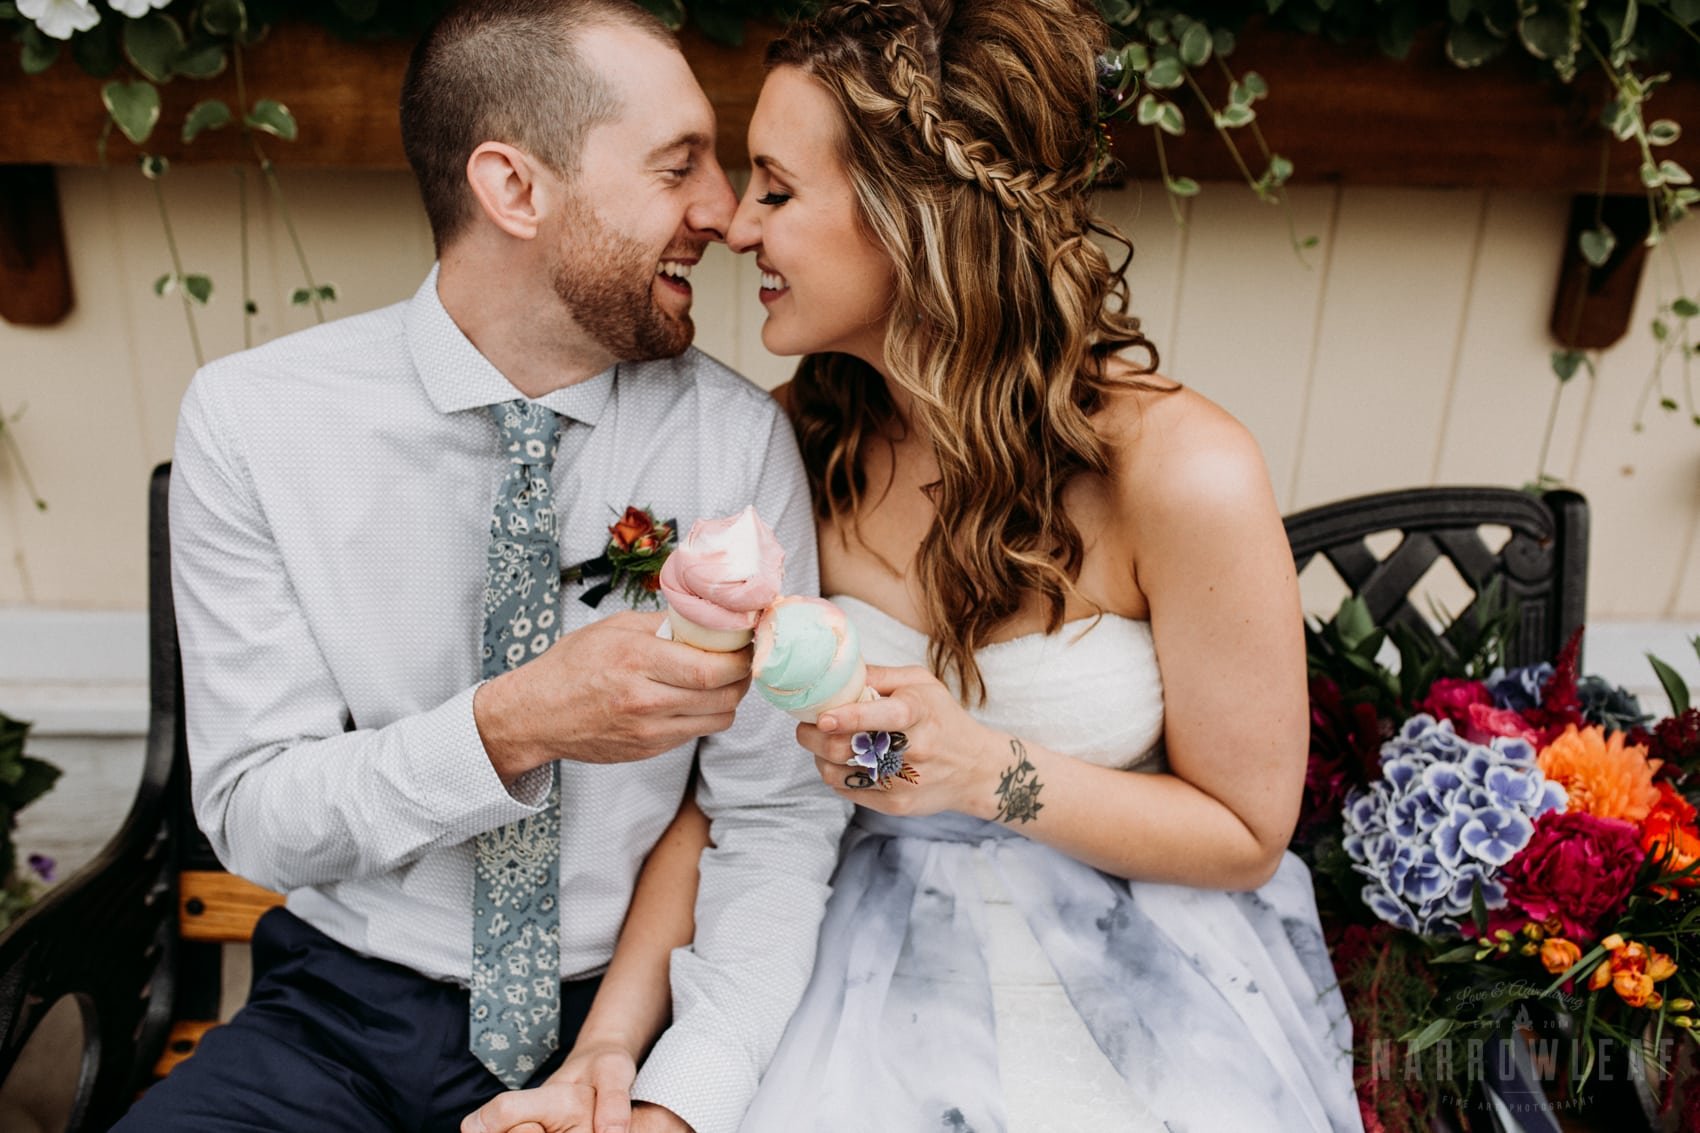 the-candy-shoppe-in-bayfield-wi-bride-groom-stop-for-ice-cream-300.jpg.jpg